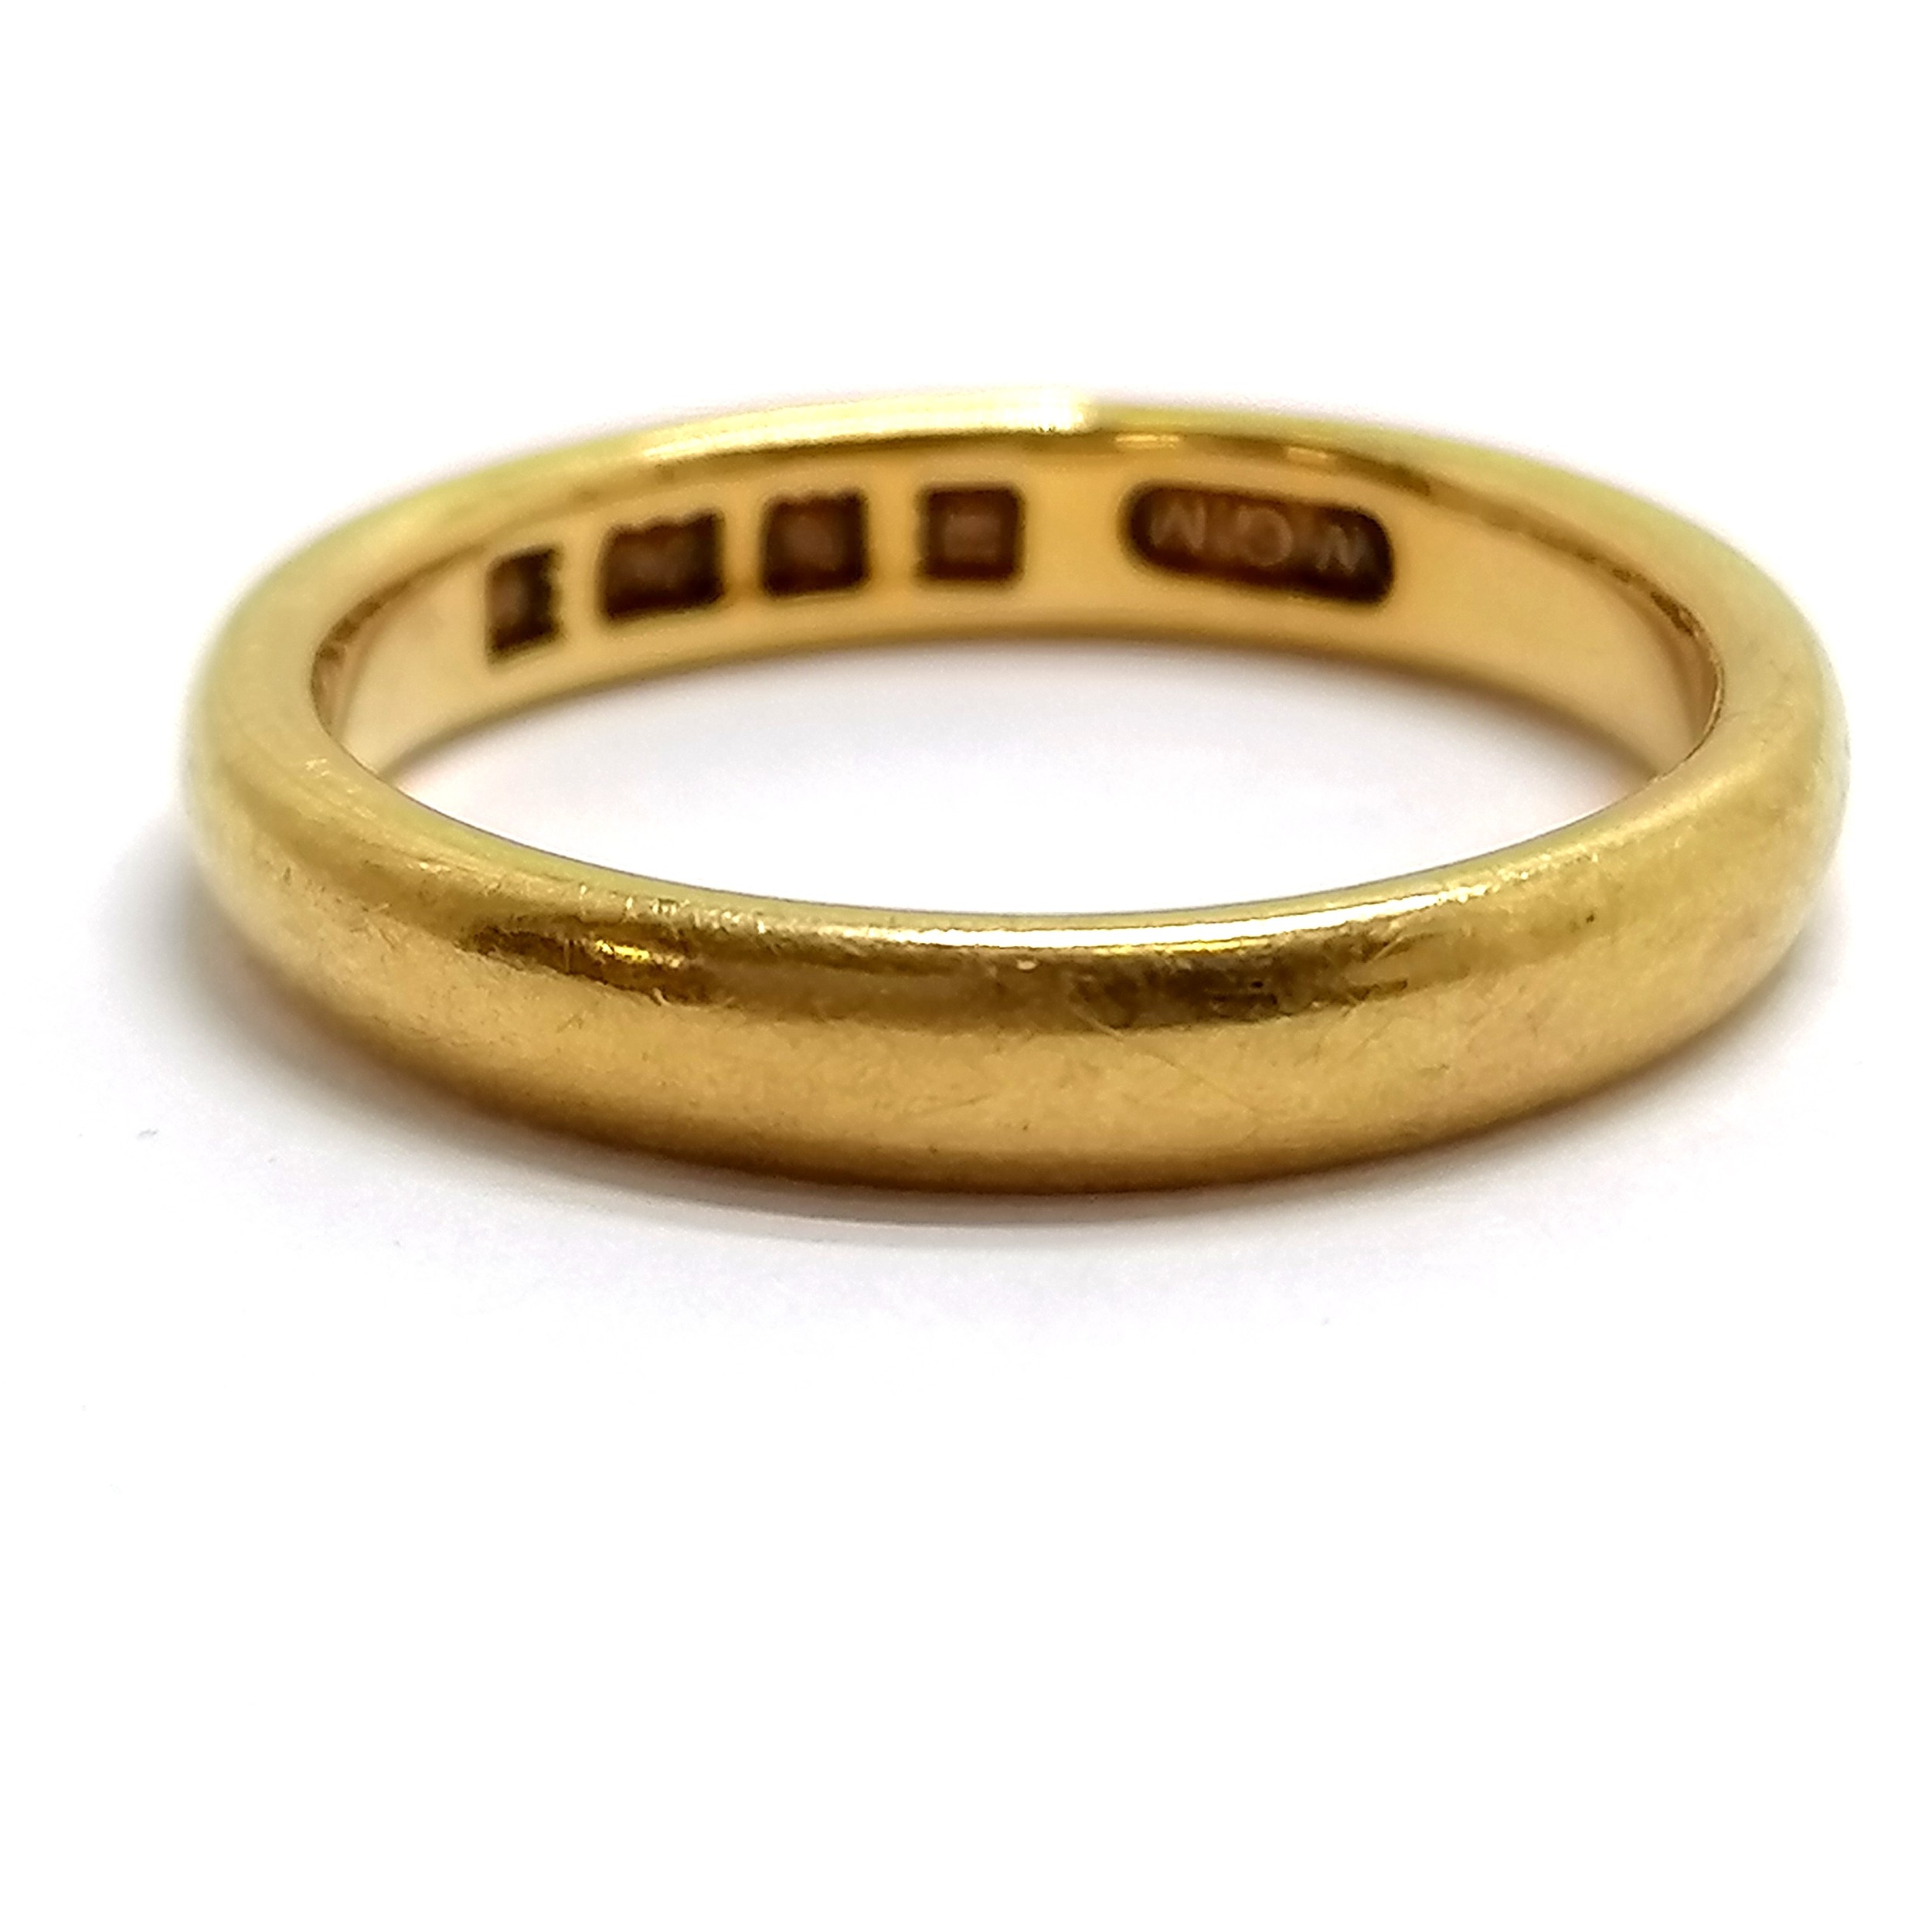 22ct hallmarked gold band ring - size P & 5.7g - 3mm wide - Image 2 of 2